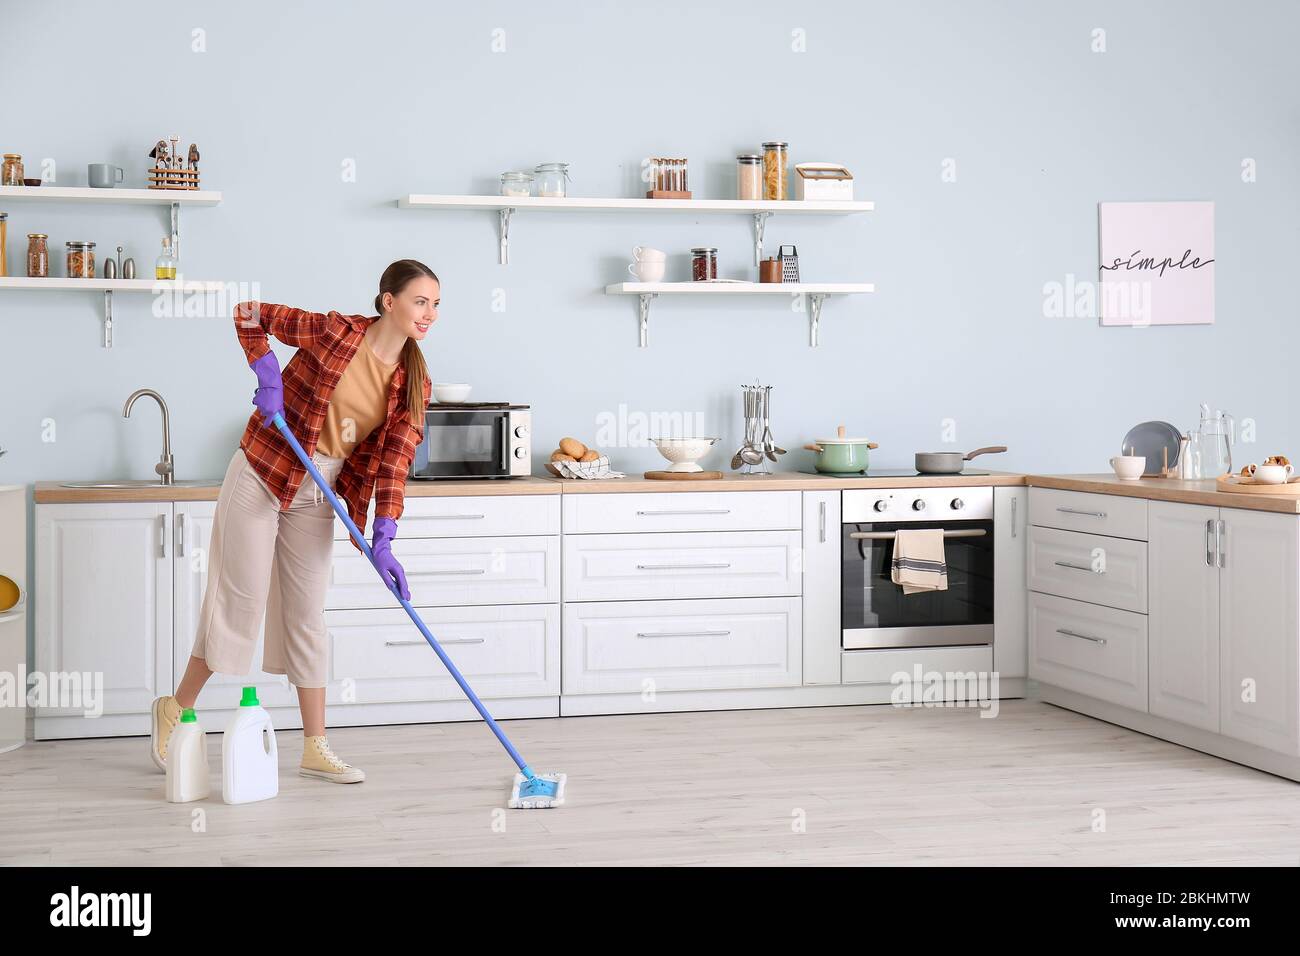 Young woman mopping floor in kitchen Stock Photo